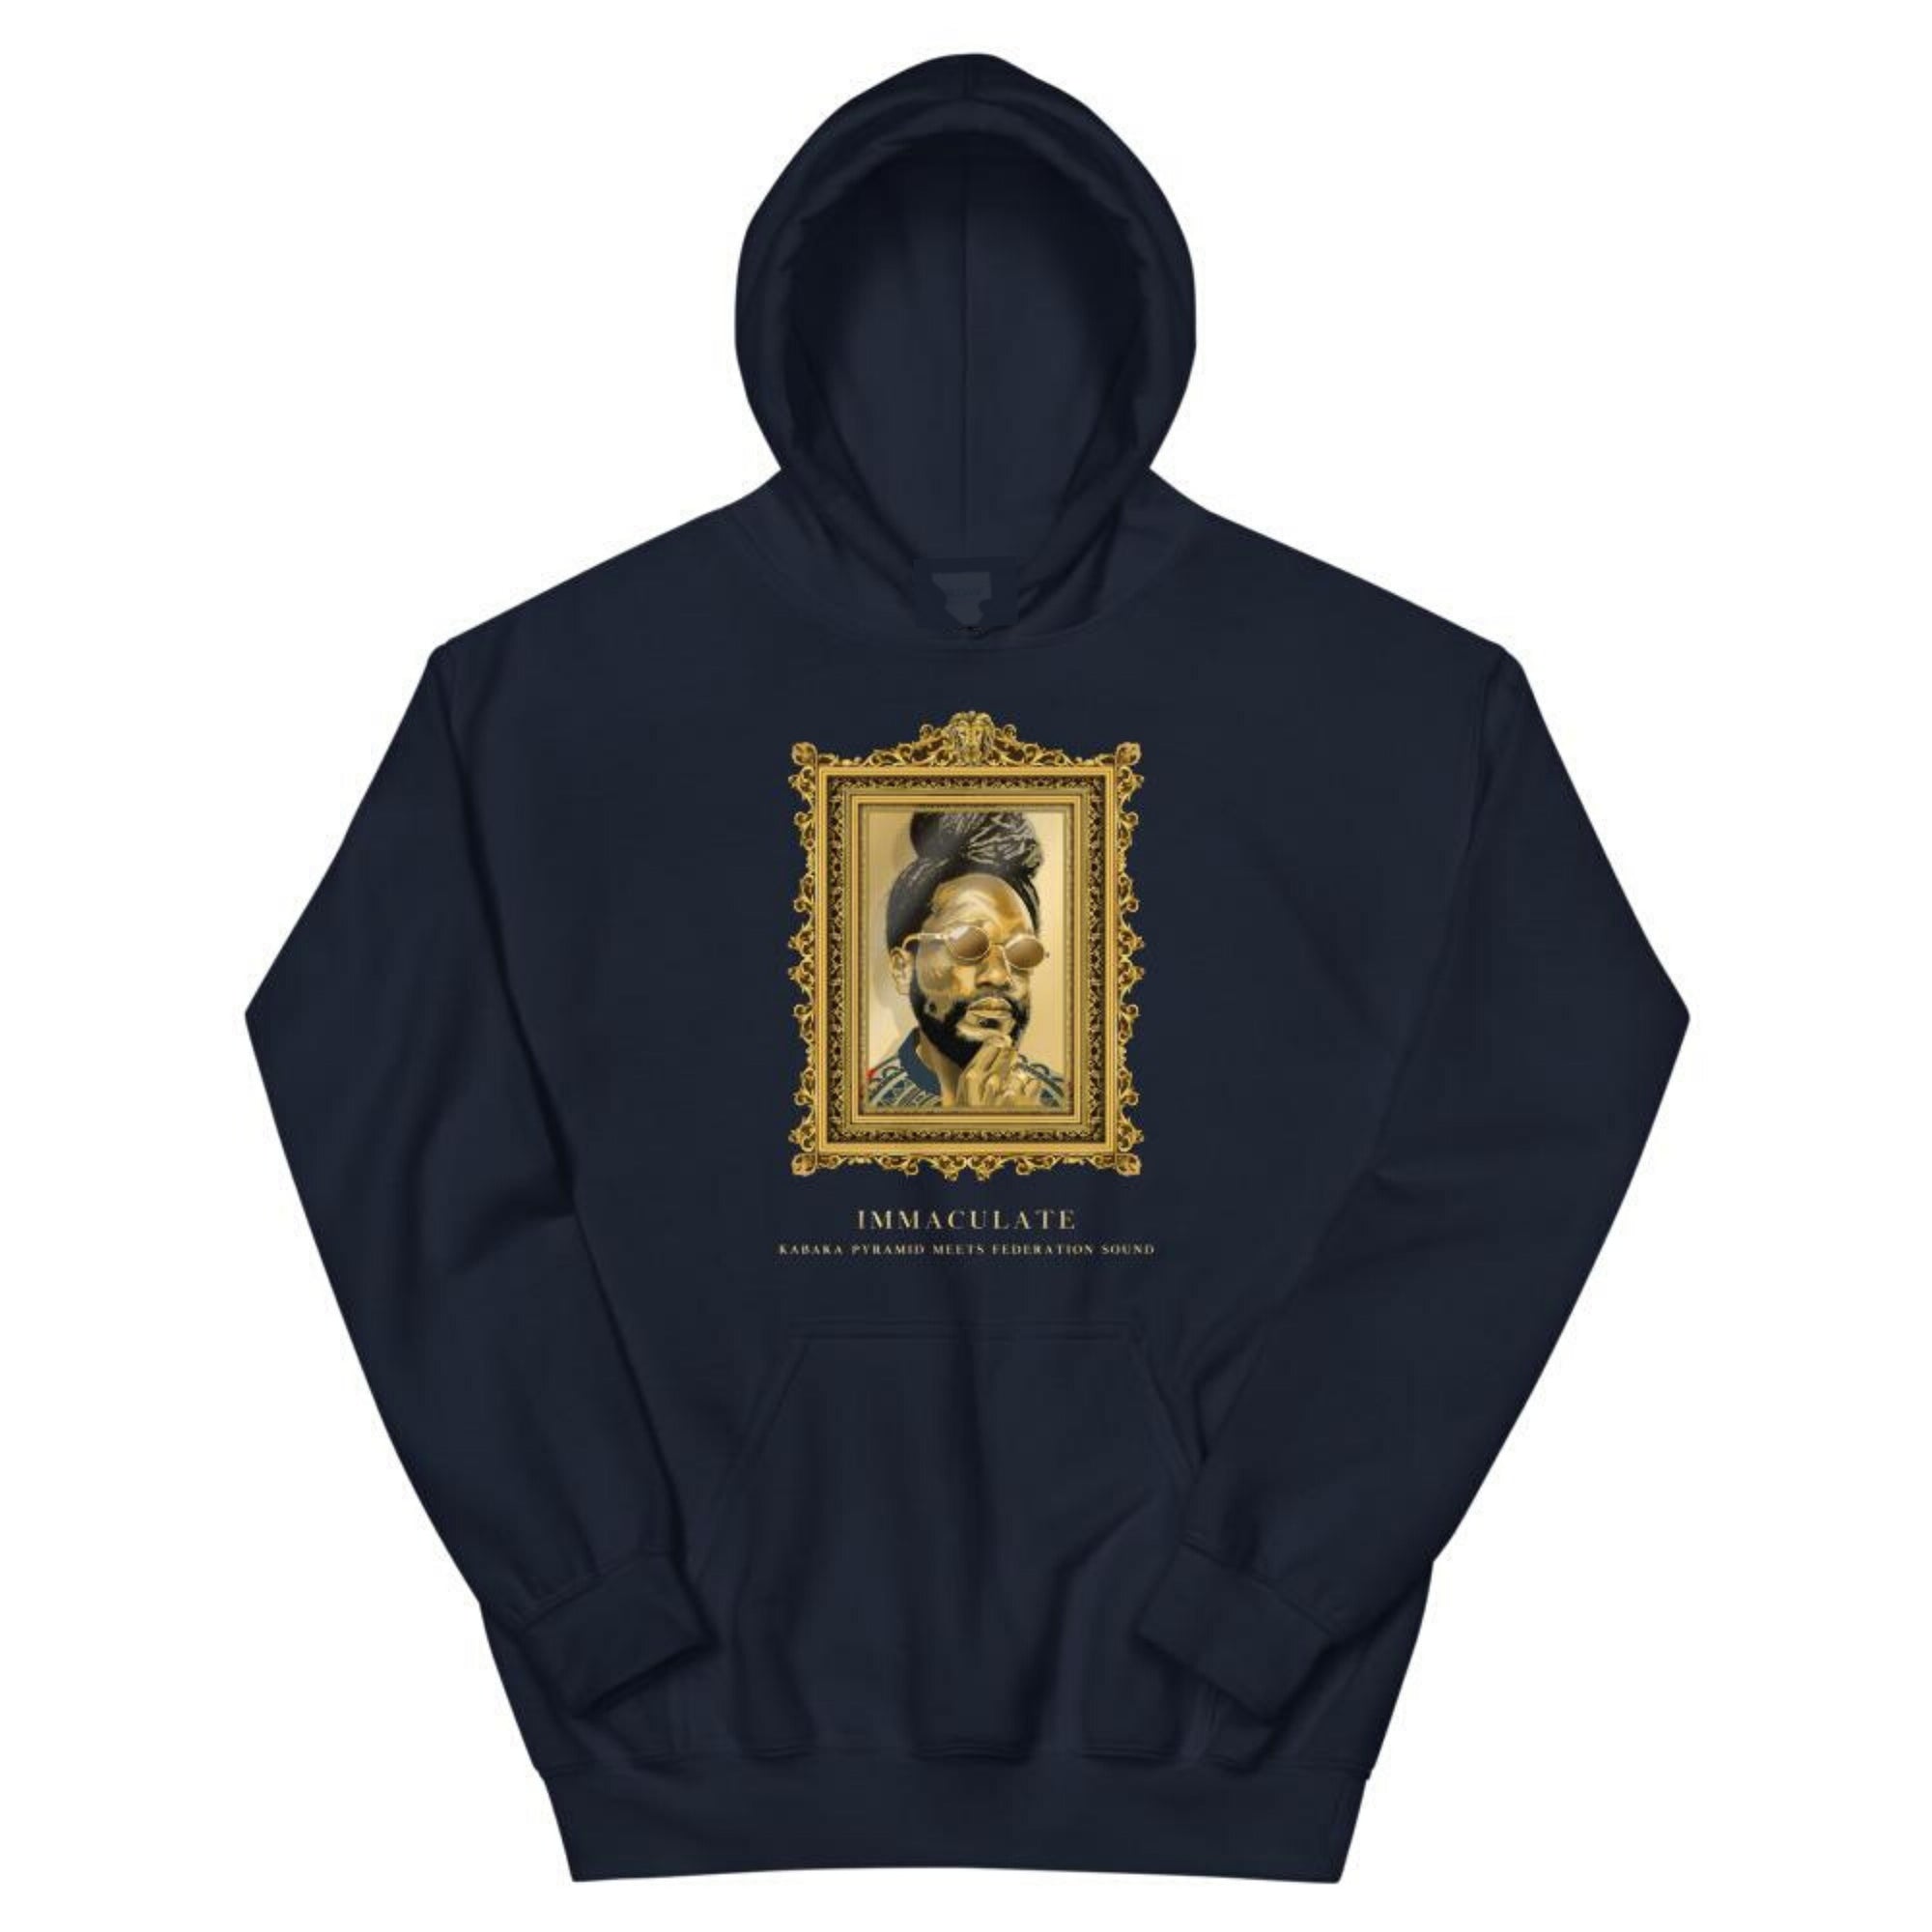 IMMACULATE PullOver (Navy)